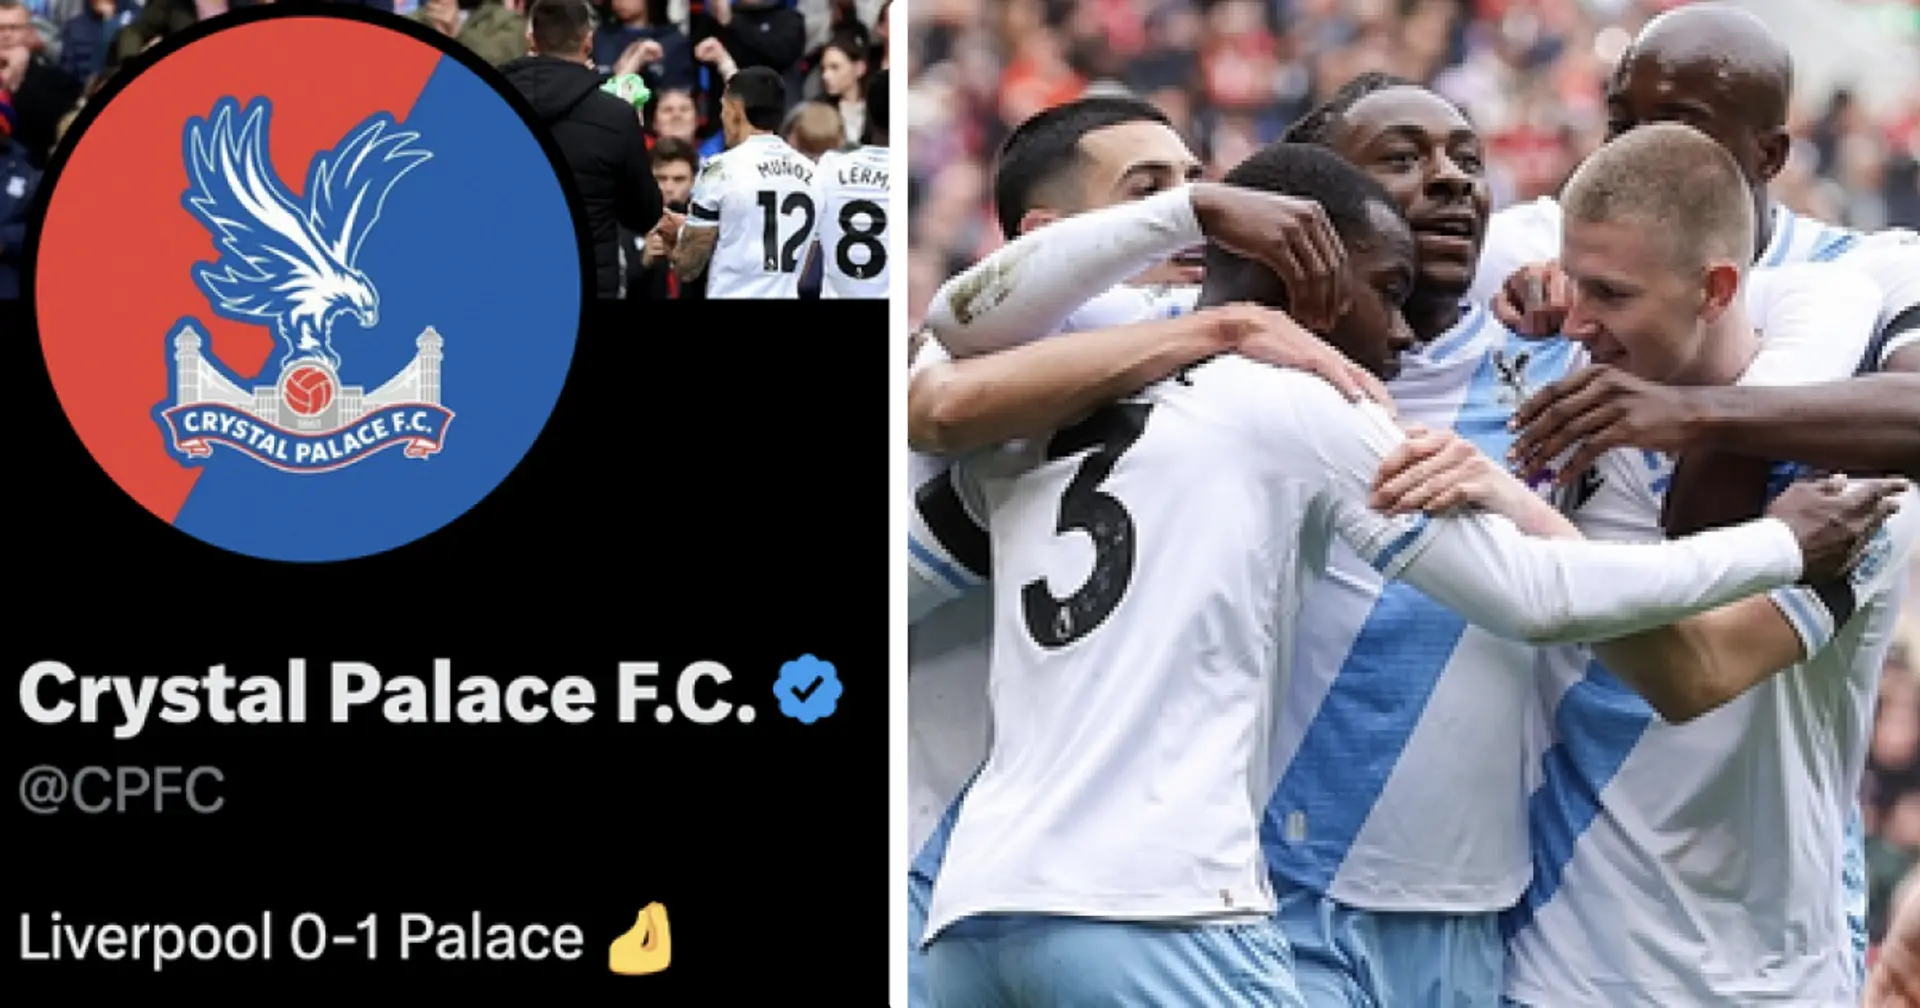 'We're everyone's cup final': Reds react as Crystal Palace put Liverpool result in TWITTER BIO